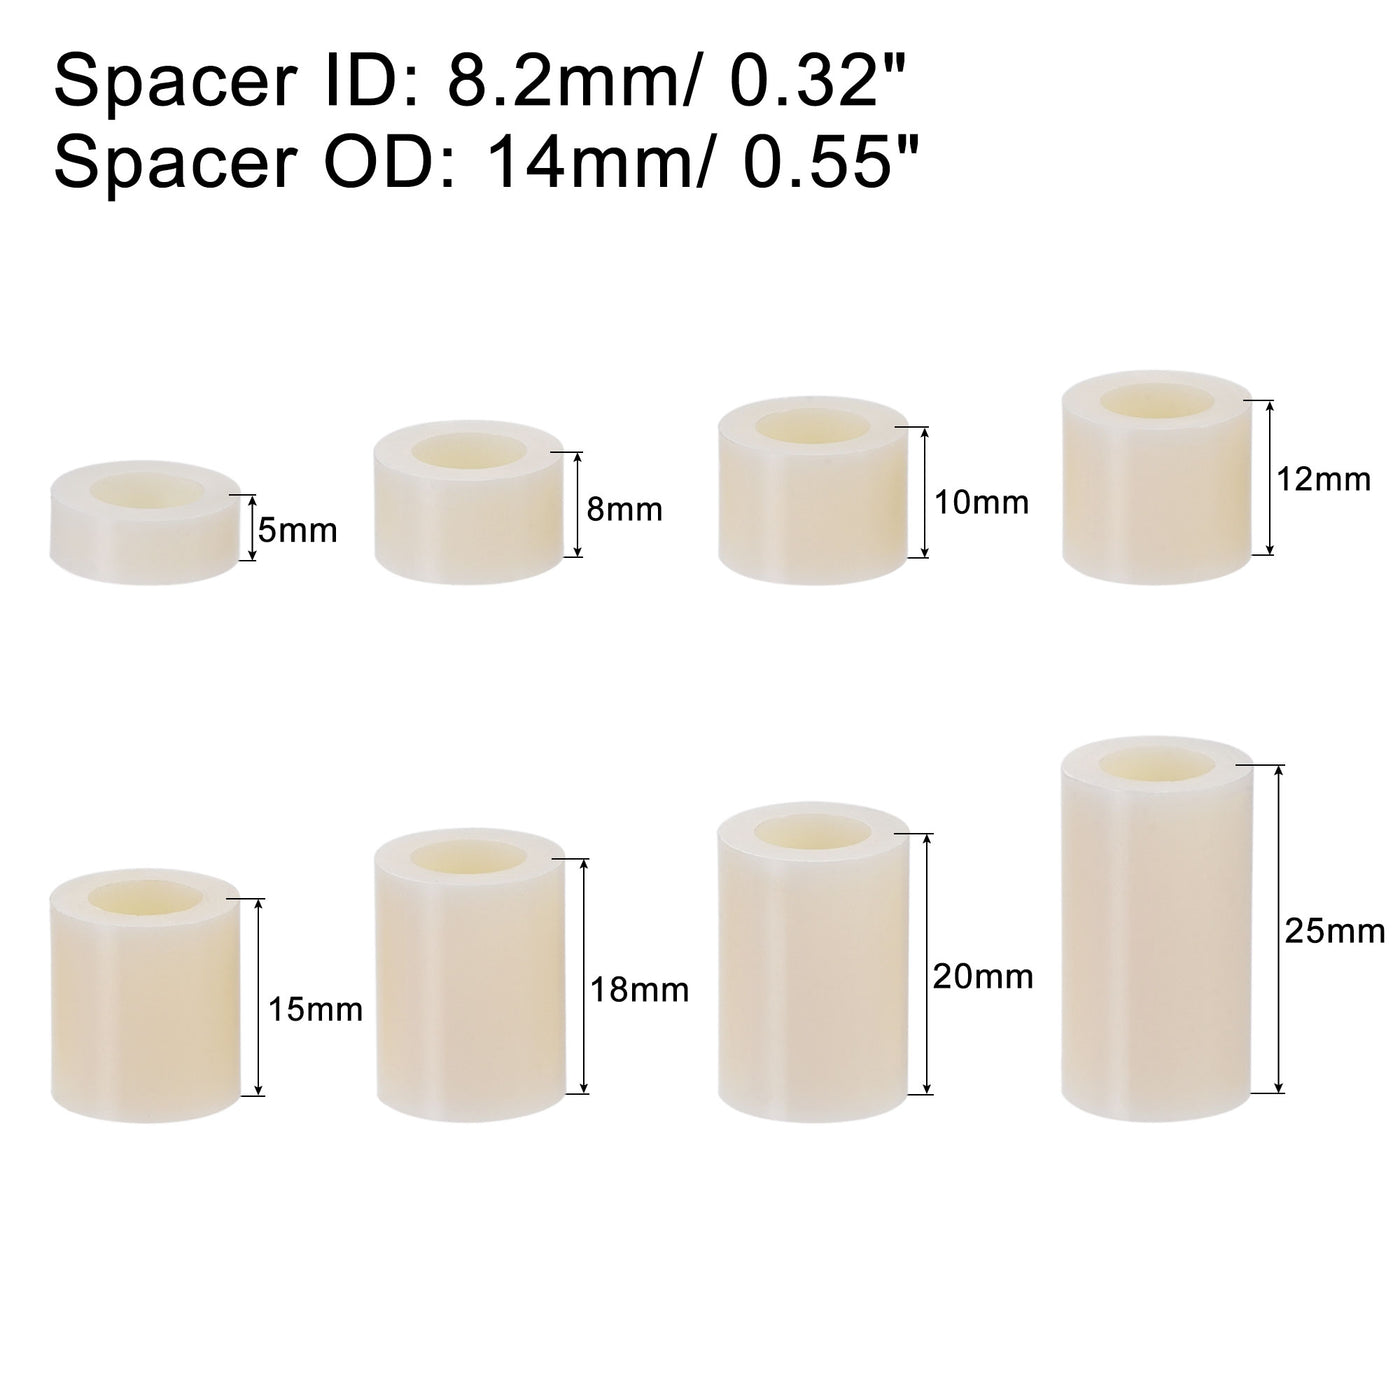 uxcell Uxcell ABS Round Spacer Assortment Kit ID 8.2mm OD 14mm, 8 Sizes Standoff, 160pcs